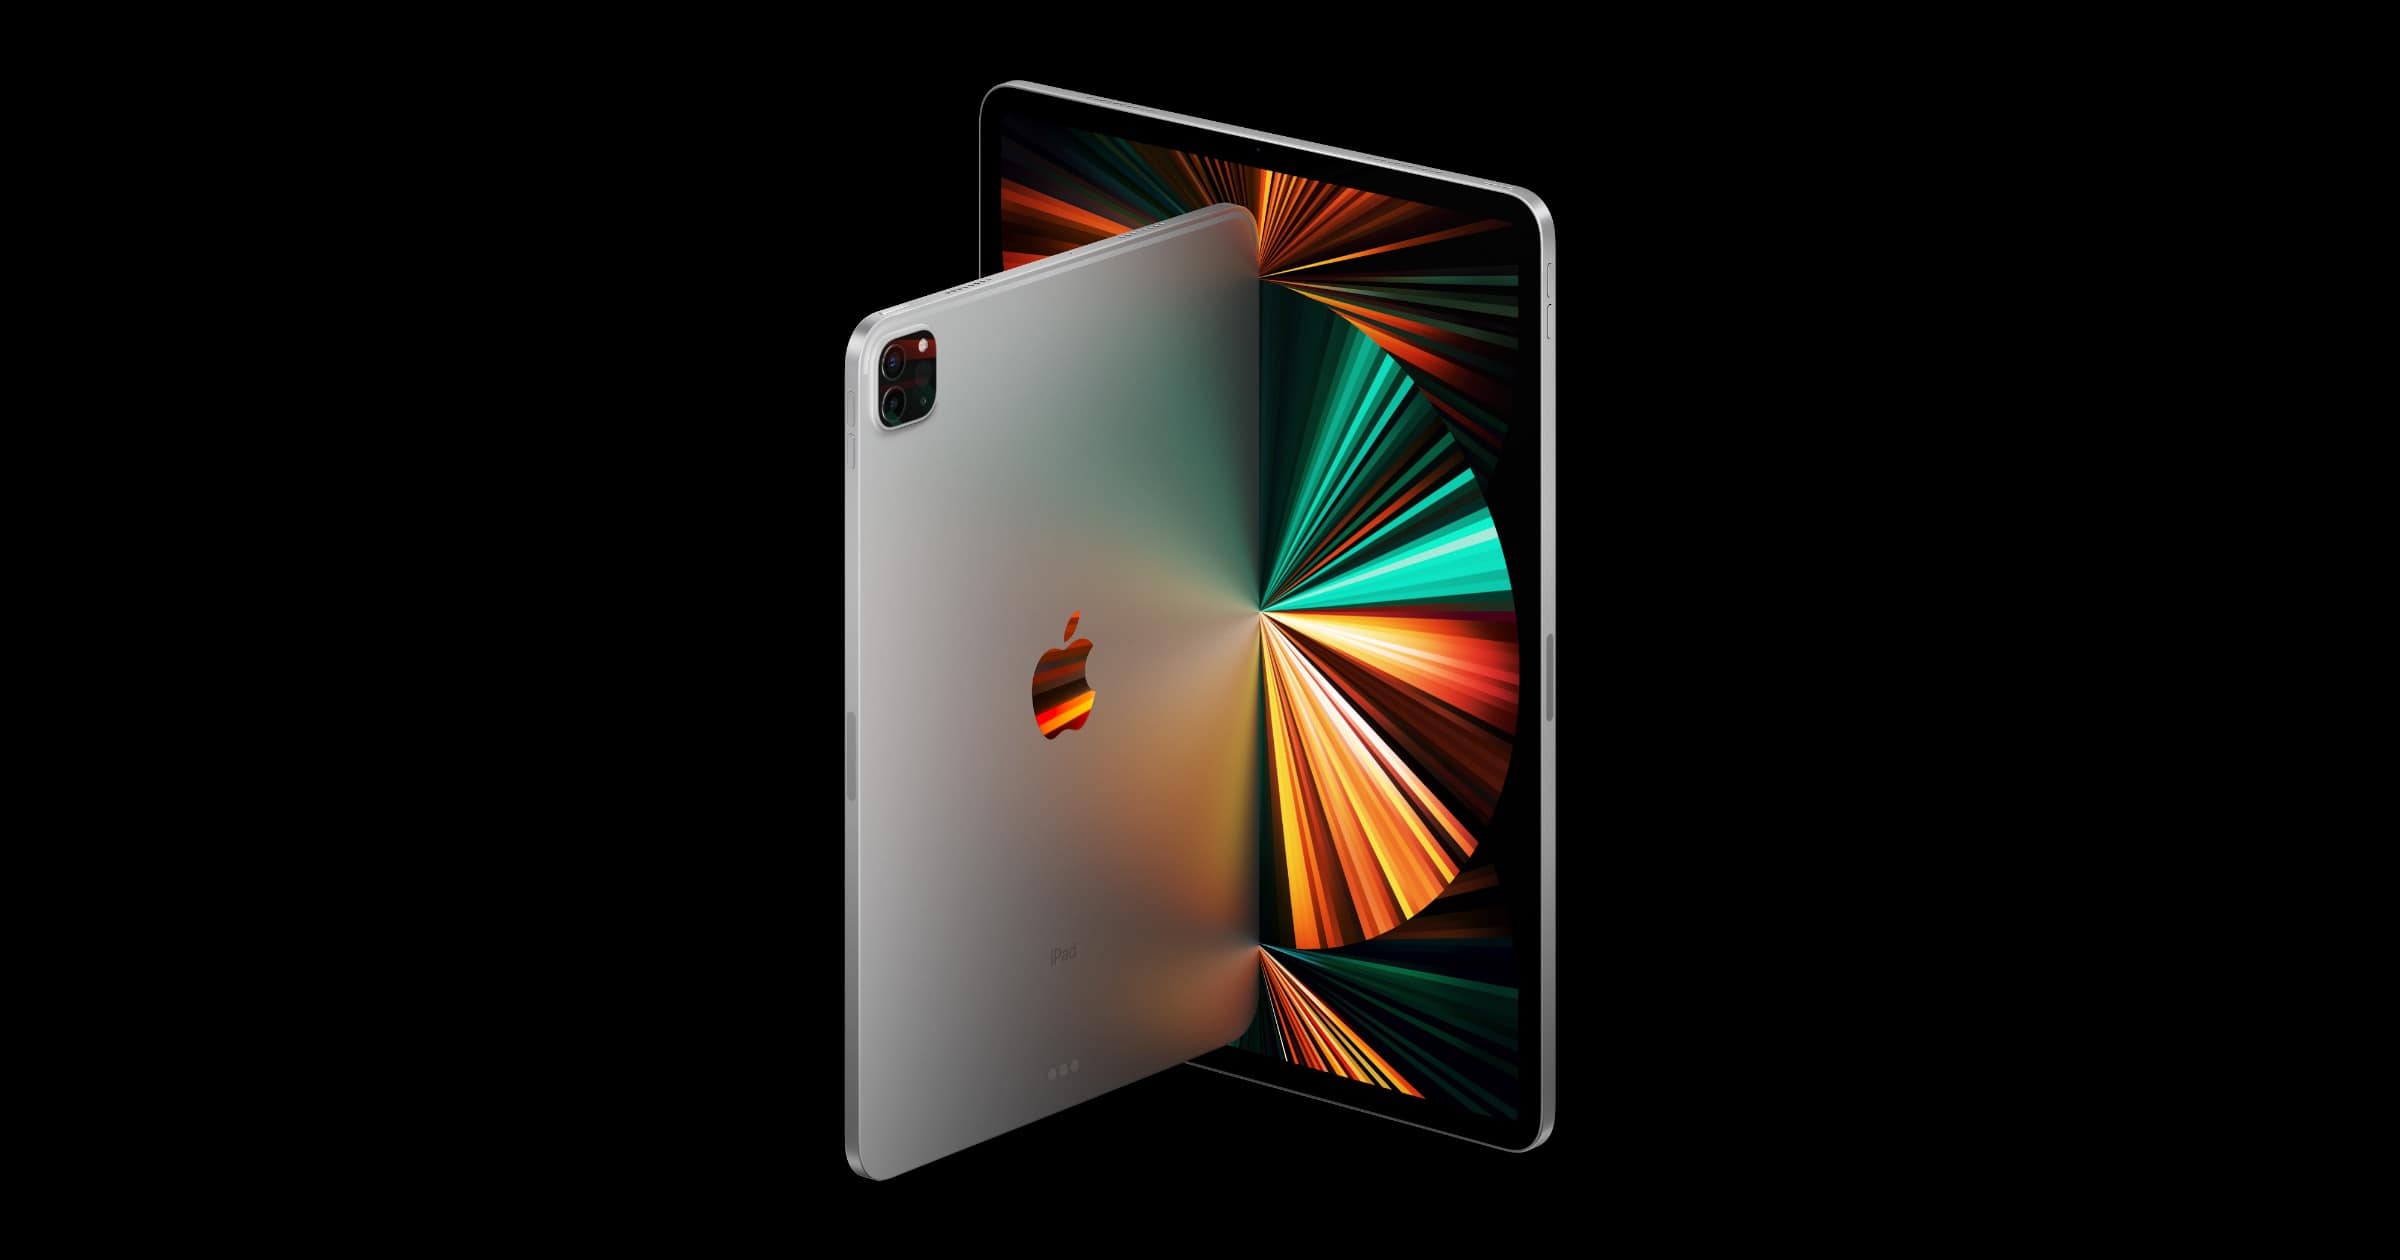 Reflections on the iPad Pro after WWDC